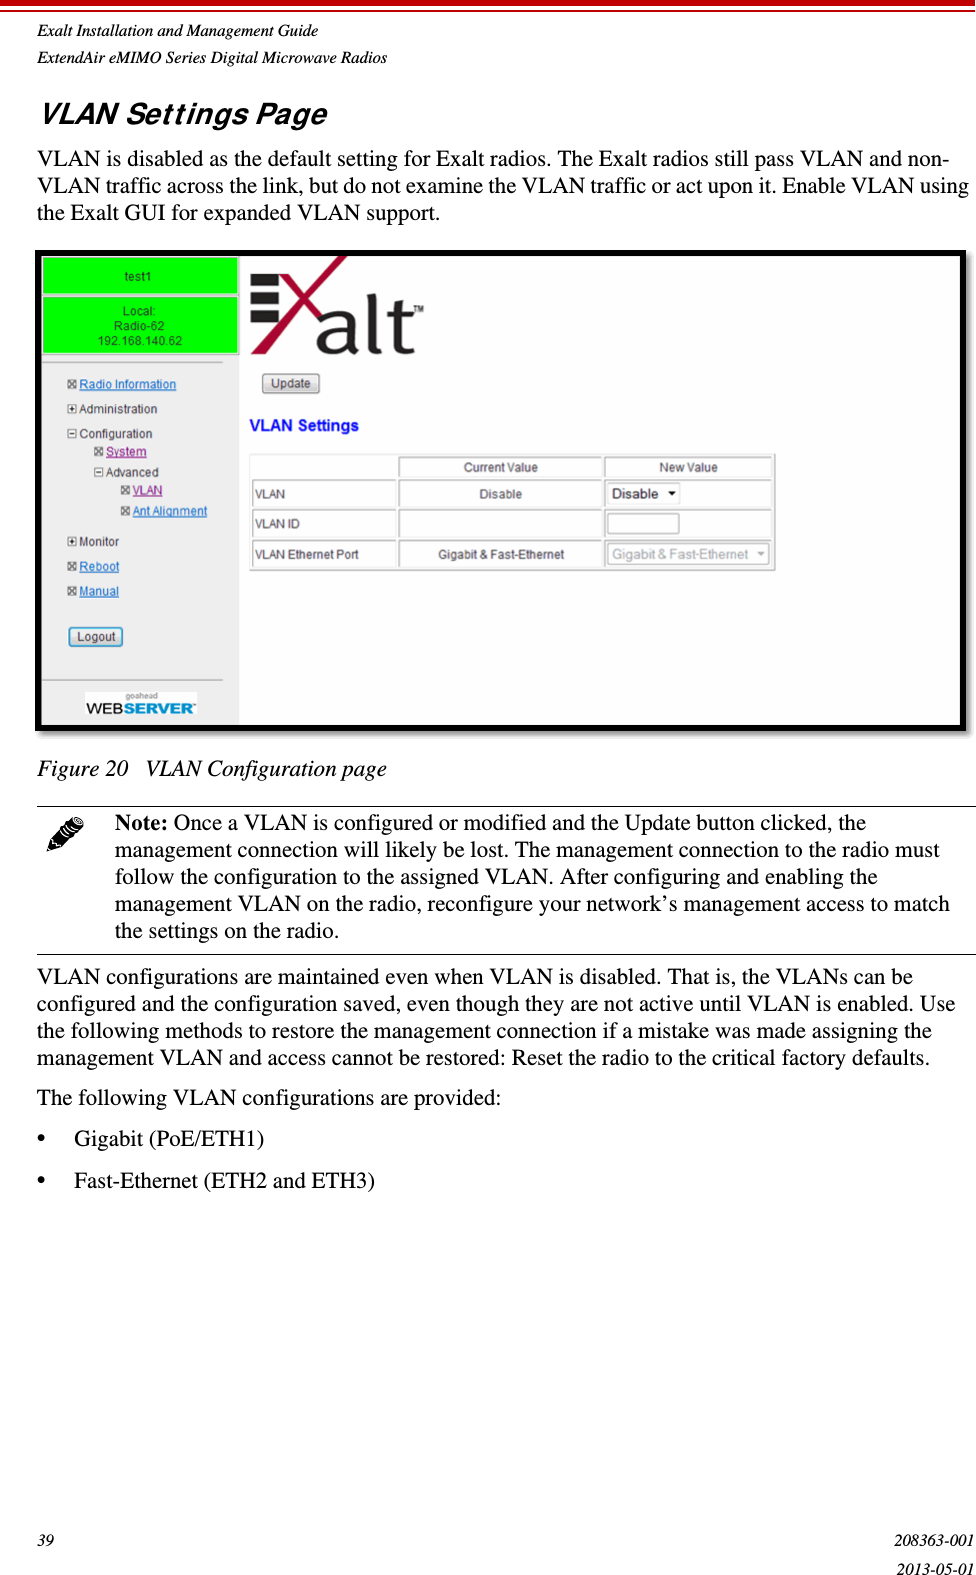 Exalt Installation and Management GuideExtendAir eMIMO Series Digital Microwave Radios39 208363-0012013-05-01VLAN Settings PageVLAN is disabled as the default setting for Exalt radios. The Exalt radios still pass VLAN and non-VLAN traffic across the link, but do not examine the VLAN traffic or act upon it. Enable VLAN using the Exalt GUI for expanded VLAN support.Figure 20   VLAN Configuration pageVLAN configurations are maintained even when VLAN is disabled. That is, the VLANs can be configured and the configuration saved, even though they are not active until VLAN is enabled. Use the following methods to restore the management connection if a mistake was made assigning the management VLAN and access cannot be restored: Reset the radio to the critical factory defaults. The following VLAN configurations are provided:•Gigabit (PoE/ETH1)•Fast-Ethernet (ETH2 and ETH3)Note: Once a VLAN is configured or modified and the Update button clicked, the management connection will likely be lost. The management connection to the radio must follow the configuration to the assigned VLAN. After configuring and enabling the management VLAN on the radio, reconfigure your network’s management access to match the settings on the radio.